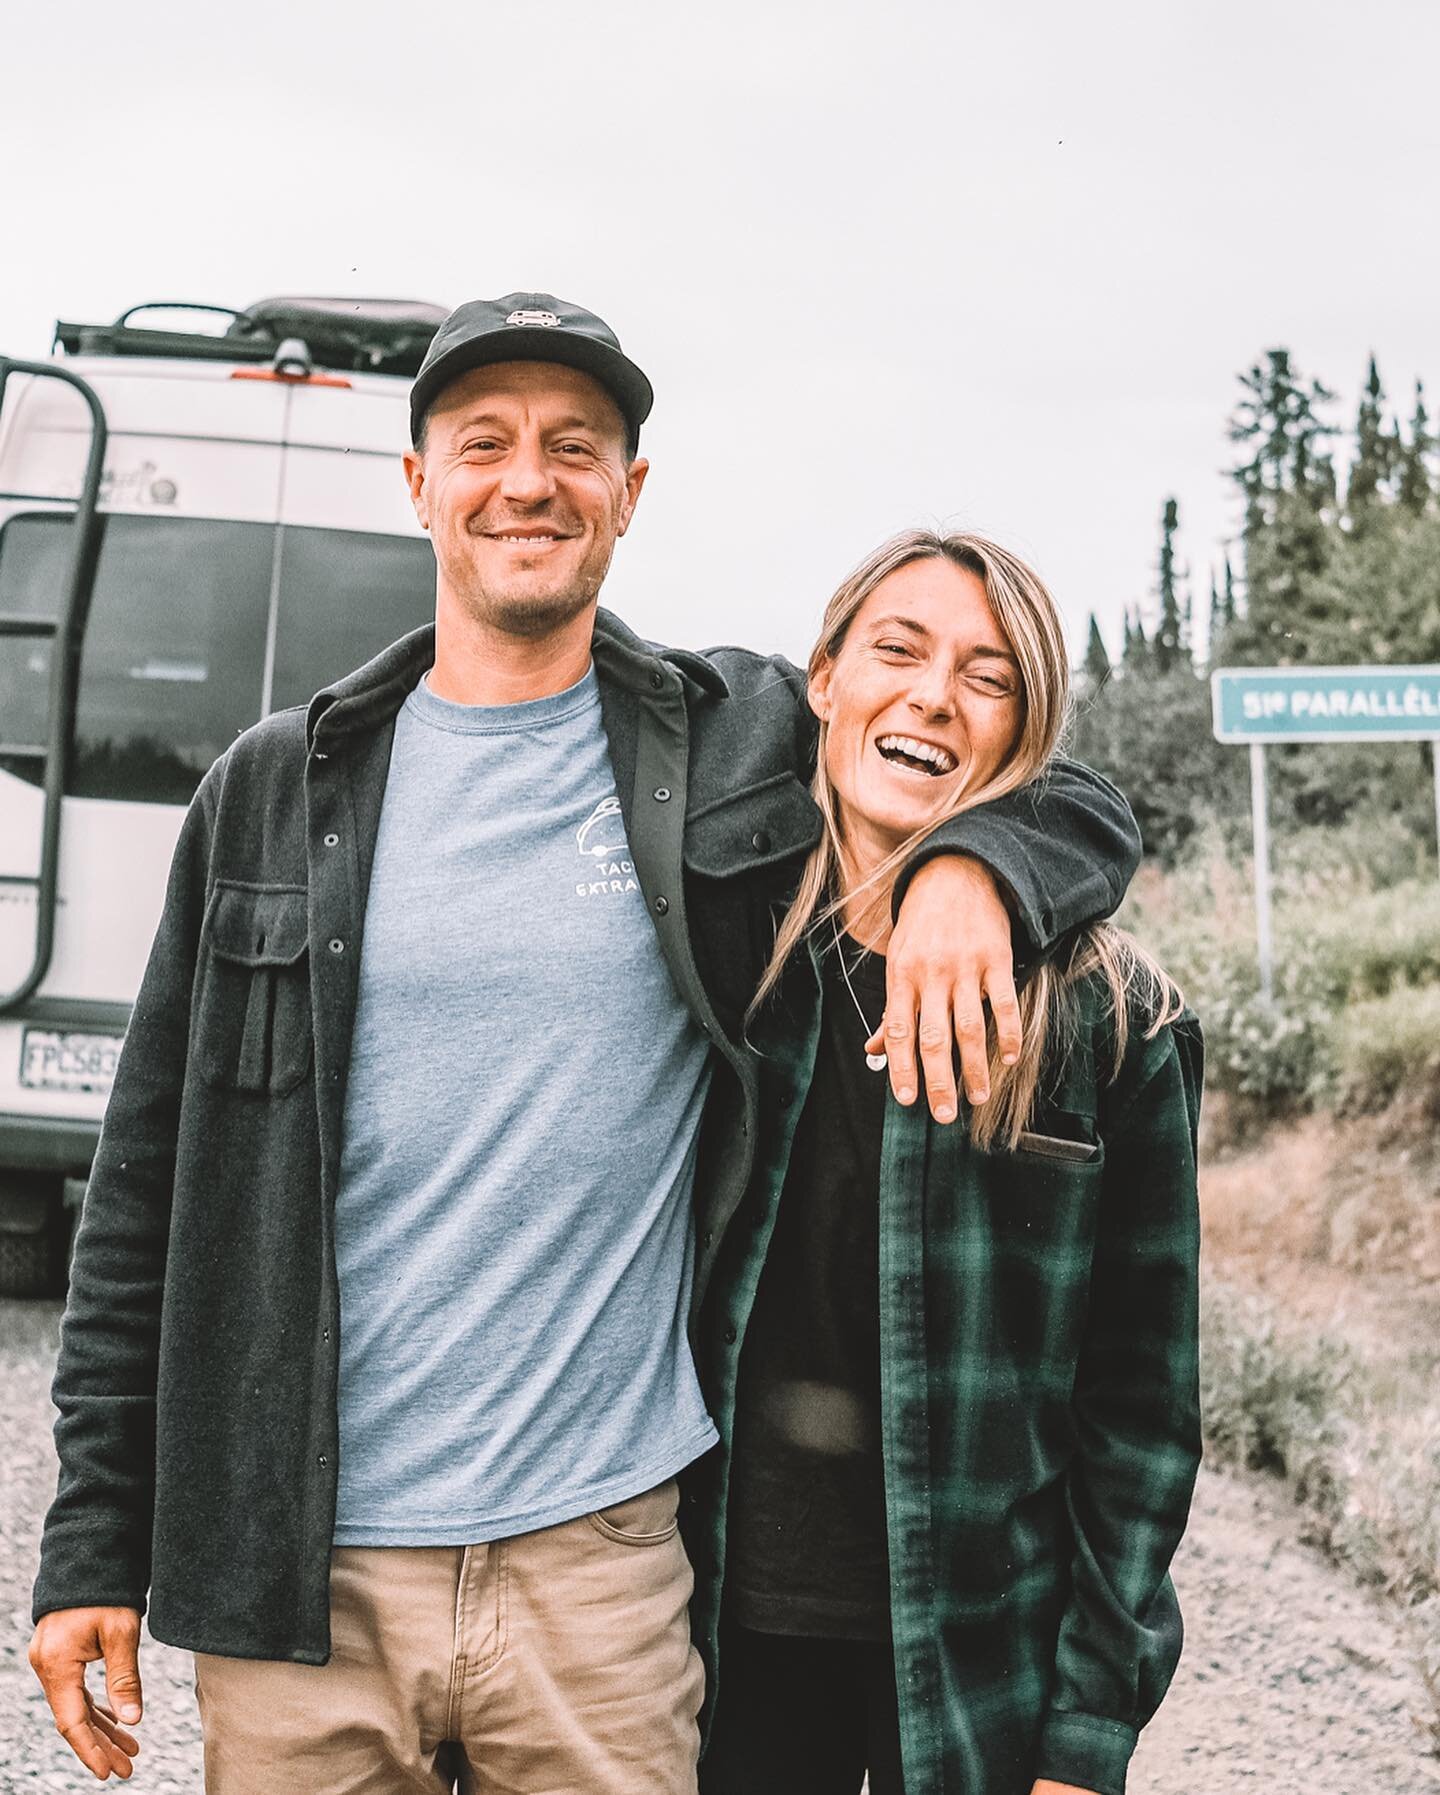 We have been so inspired along the way by our friends &amp; vanlife family, Julien &amp; Karo from @go_van_com 💛 We have been fortunate enough to collaborate on some amazing vanlife community gatherings &amp; campouts &amp; we miss catching up face 